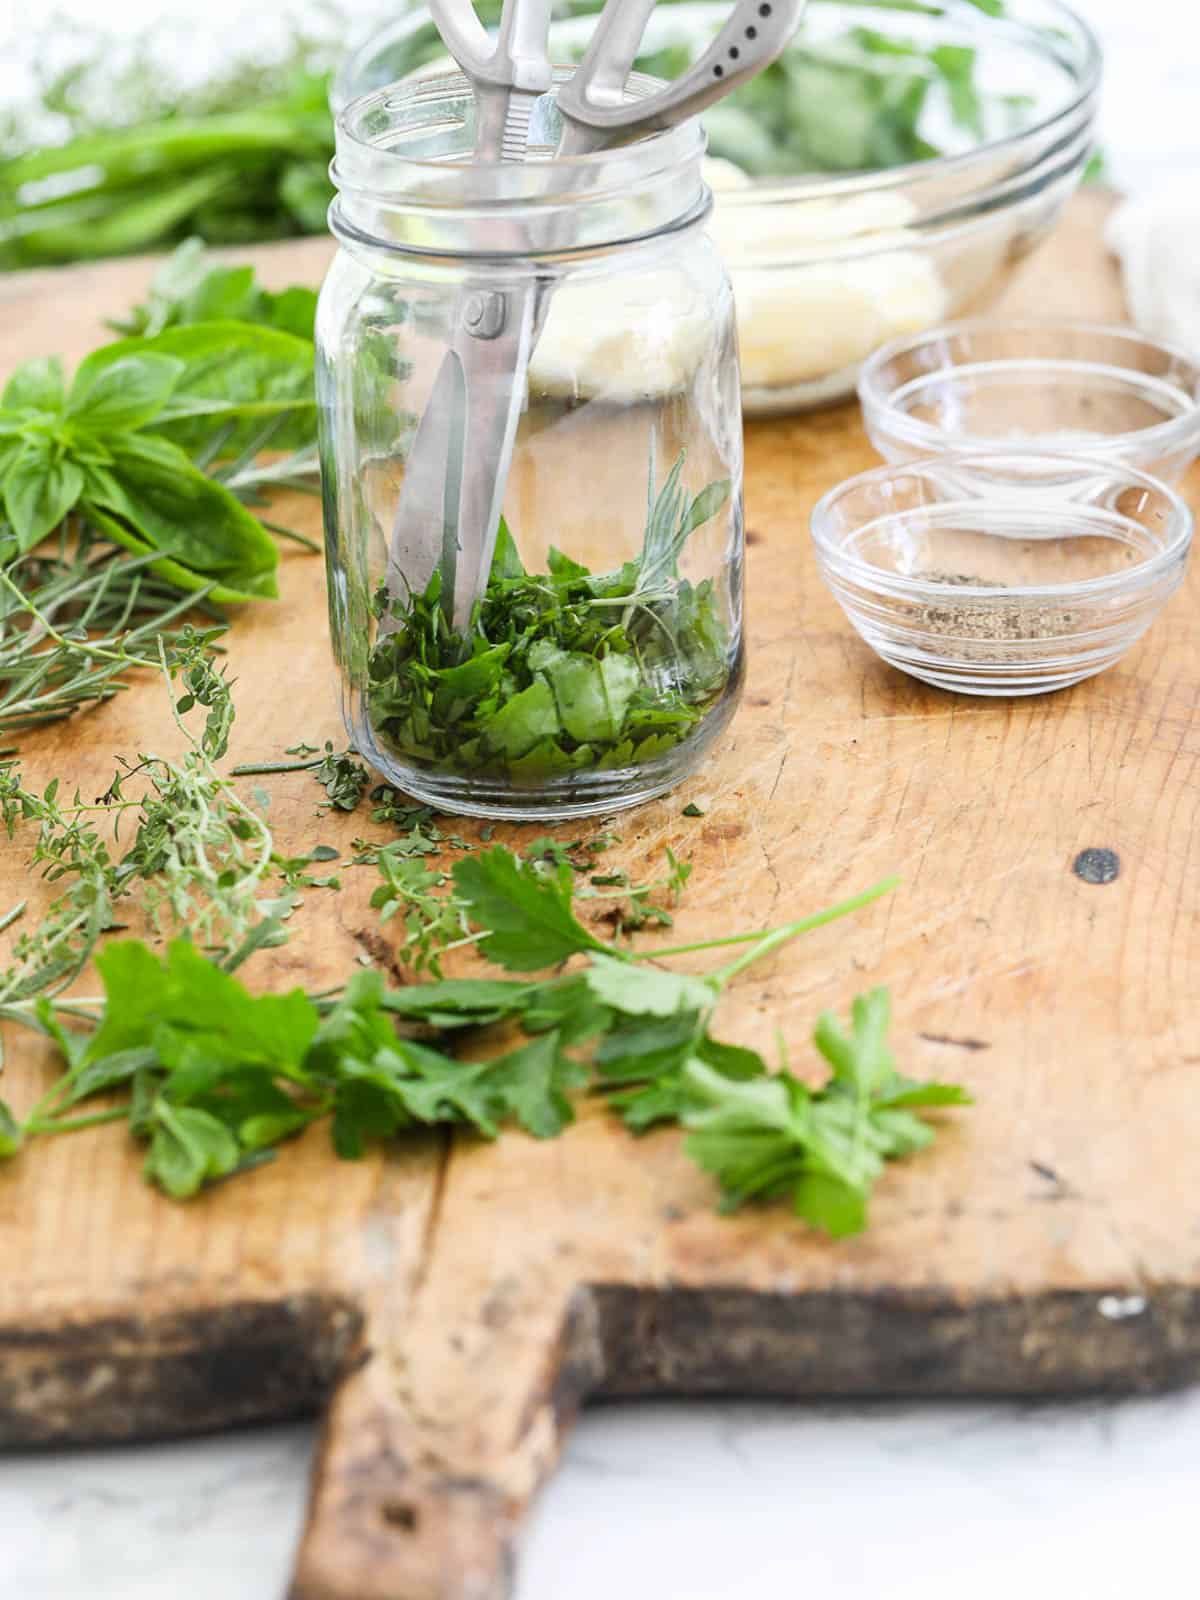 A pair of silver kitchen scissors in a glass jar with fresh herbs and butter to making herb butter.